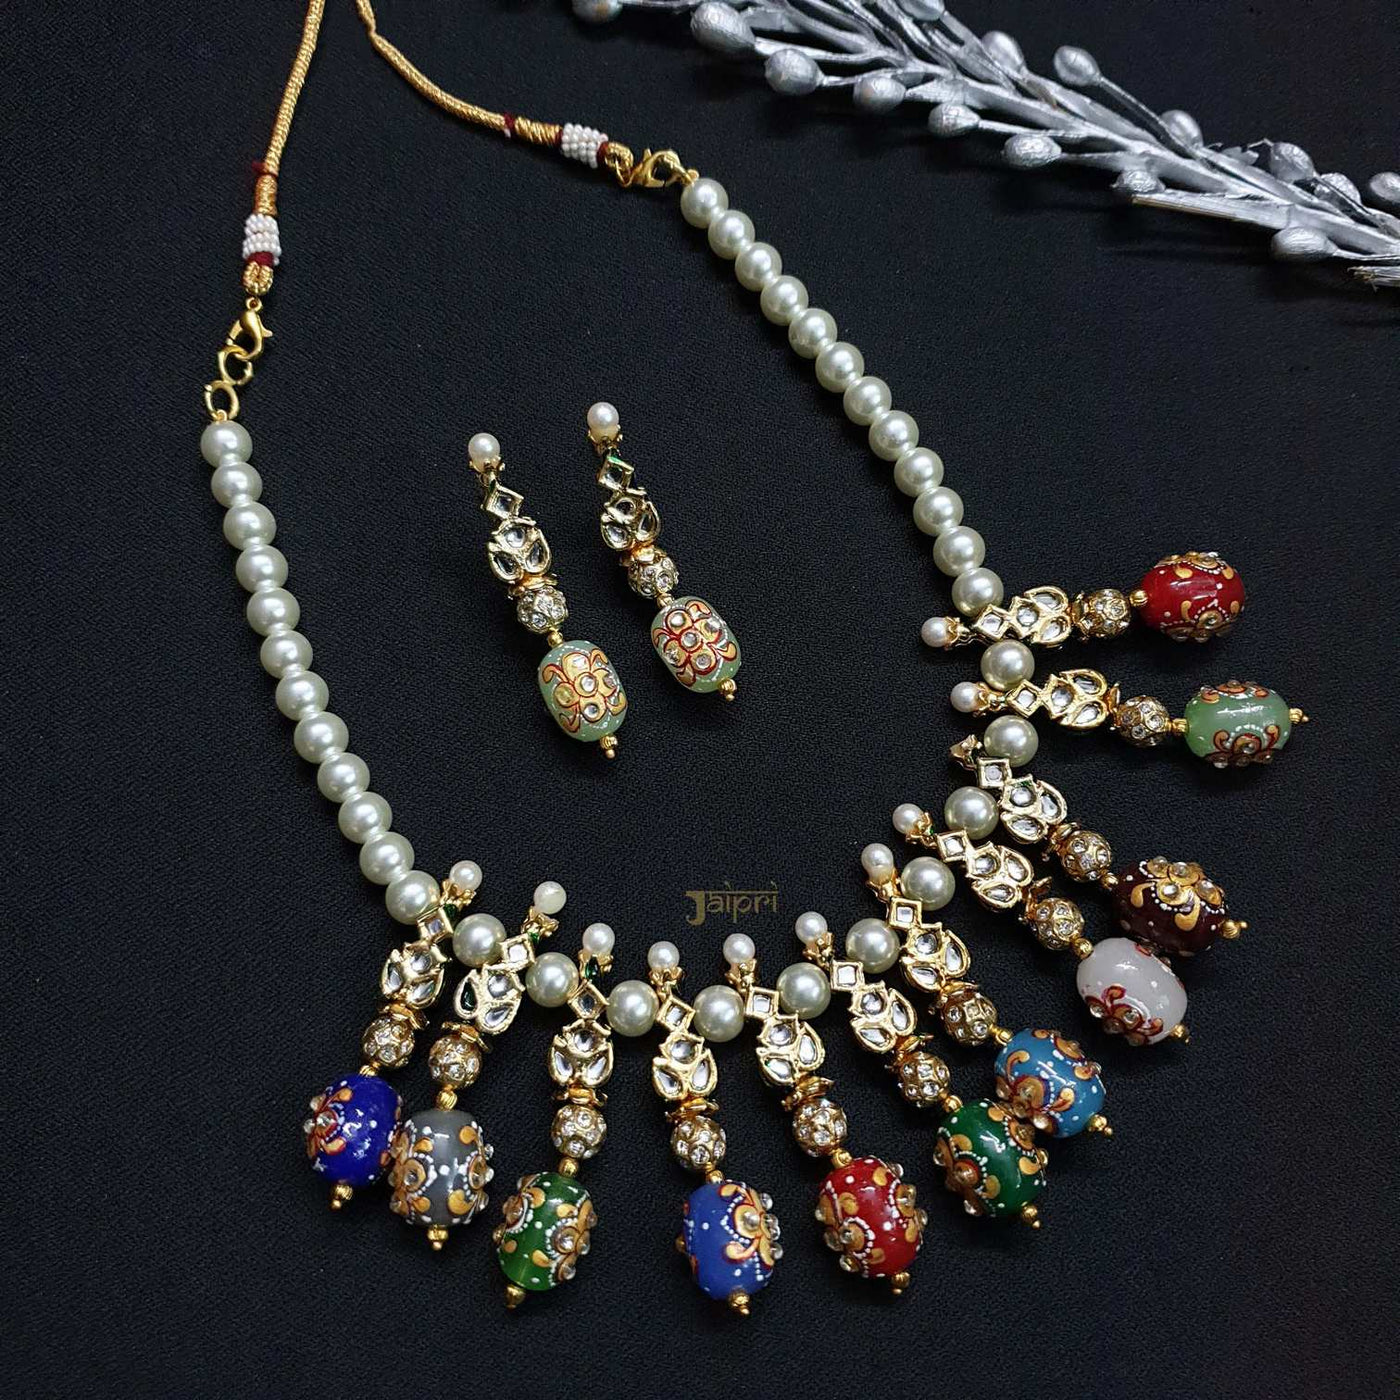 Adorable Kundan & Multicolor Beads Stone Necklace With Earrings